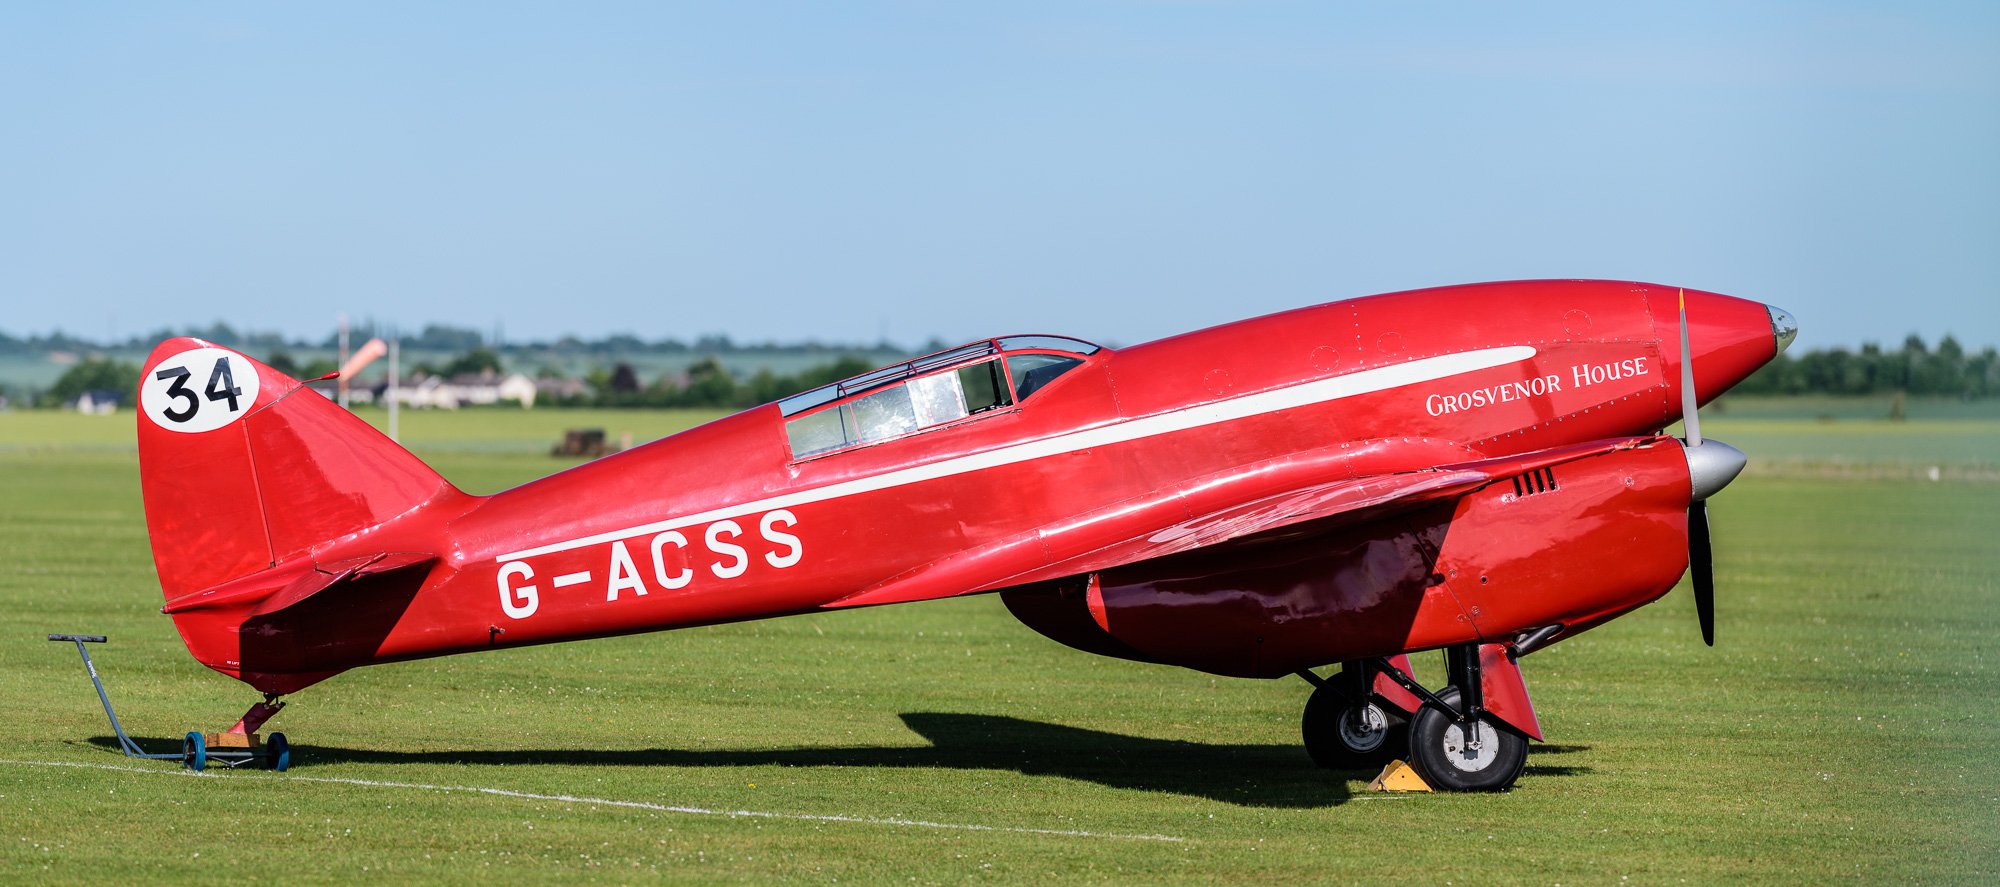 DH88 Comet (G-ACSS)